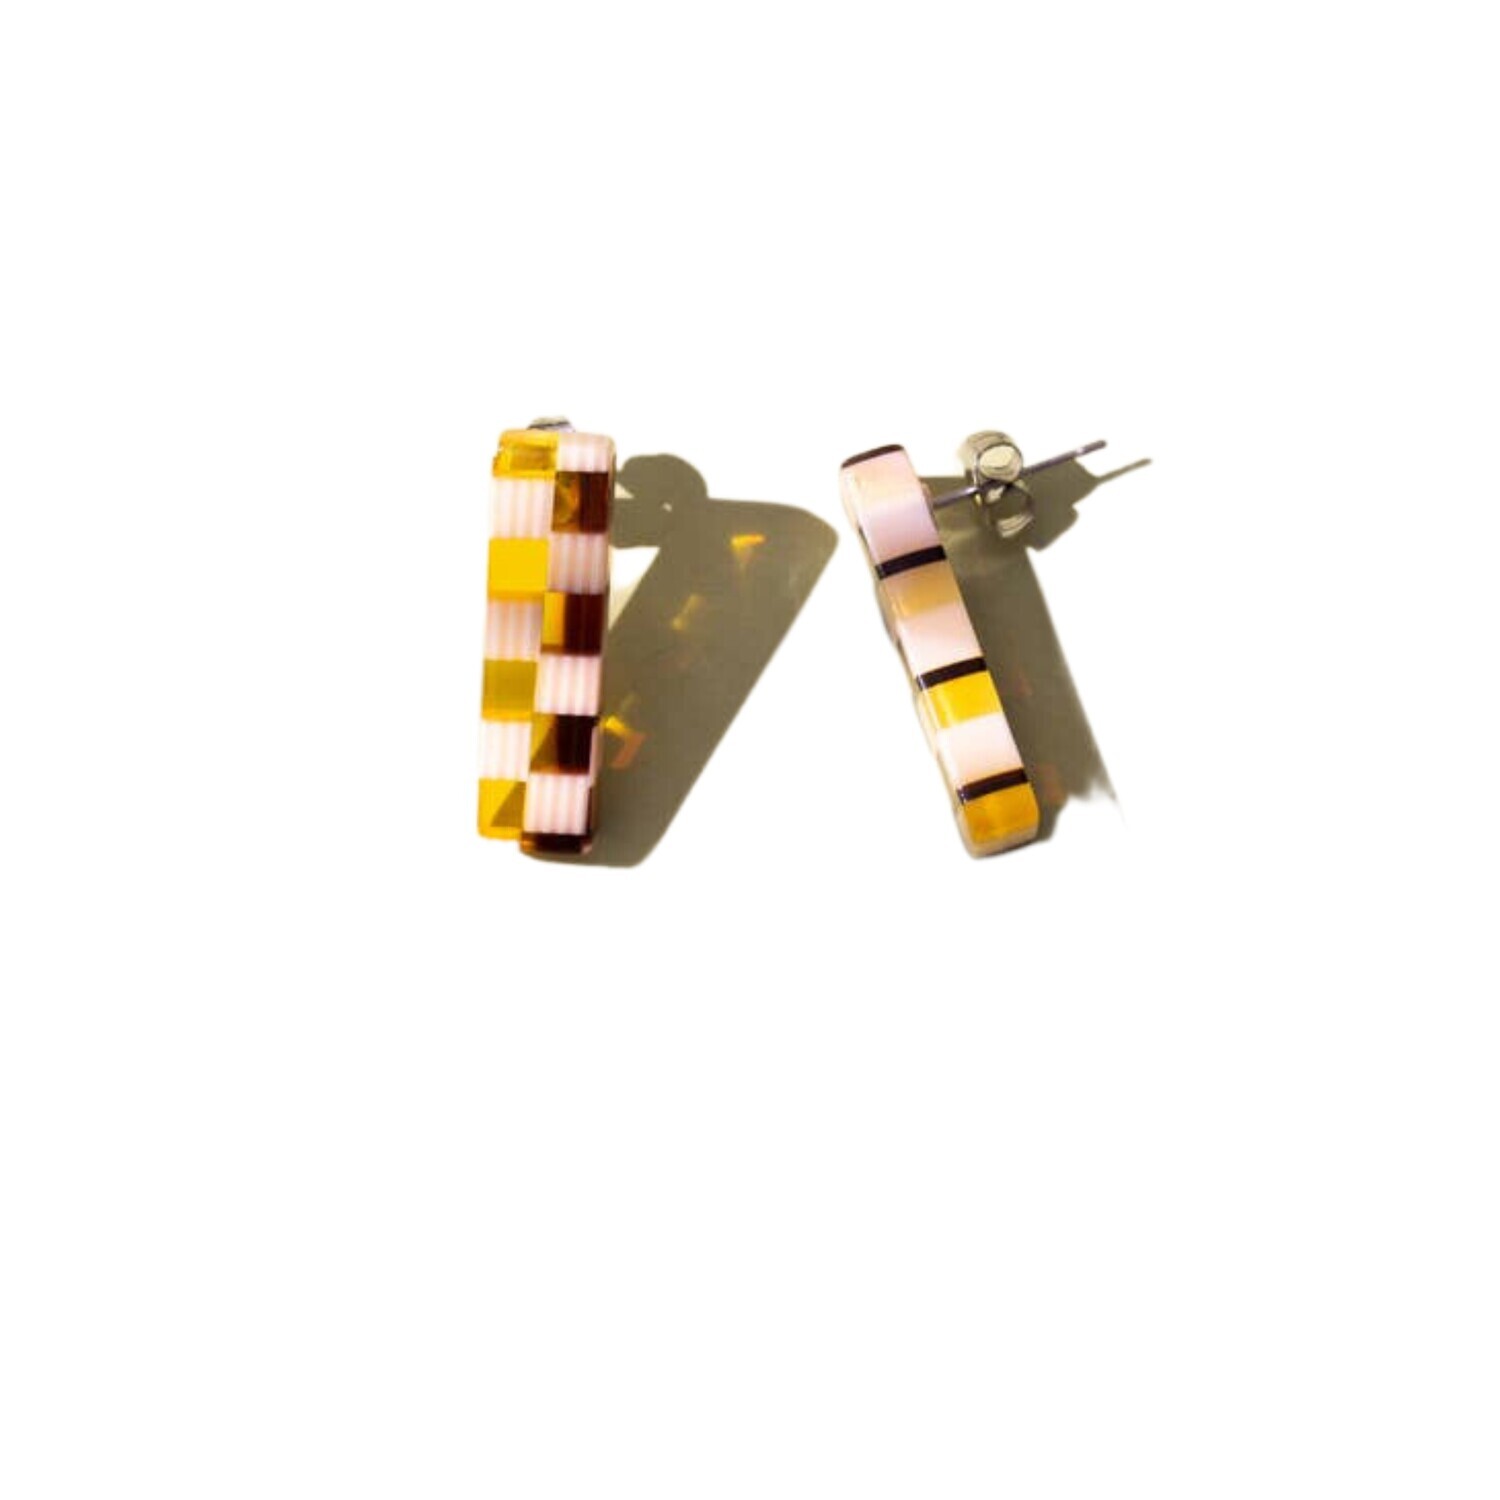 IVY CHECKERED STUD EARRINGS